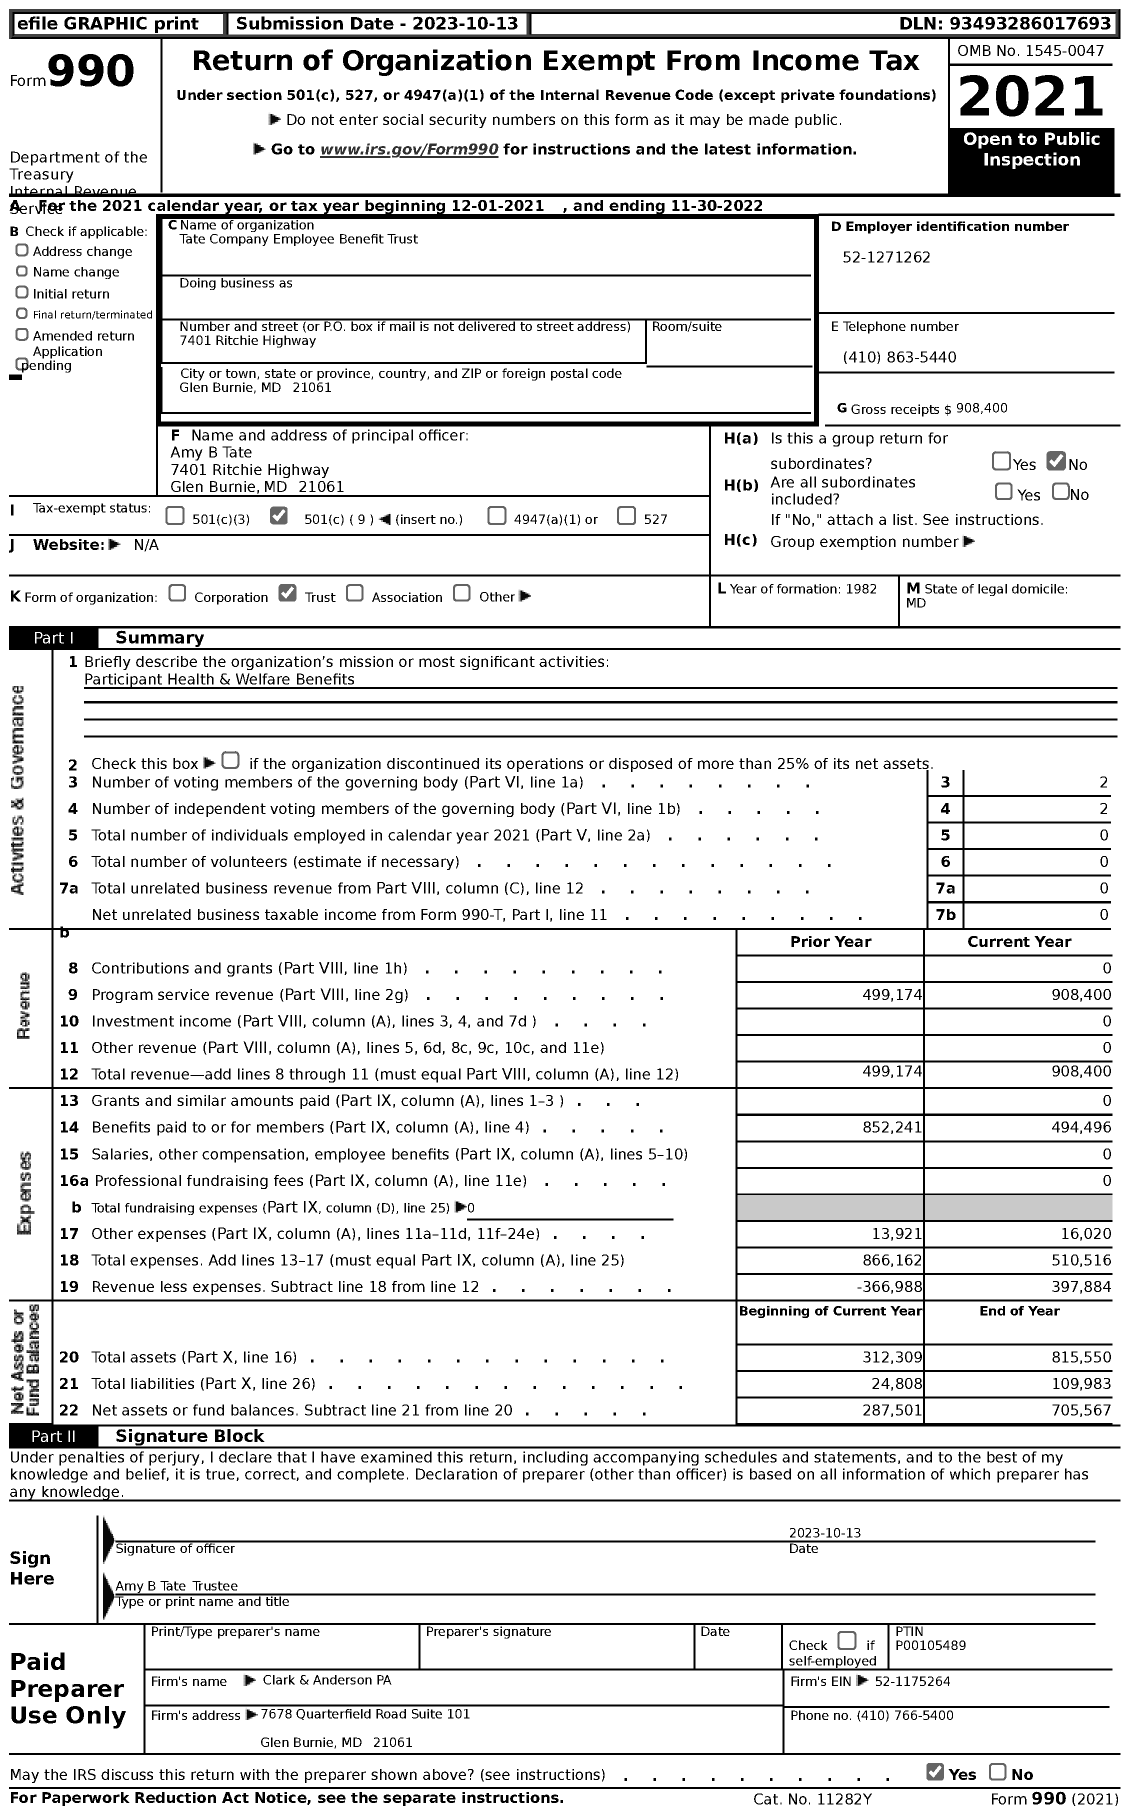 Image of first page of 2021 Form 990 for Tate Company Employee Benefit Trust